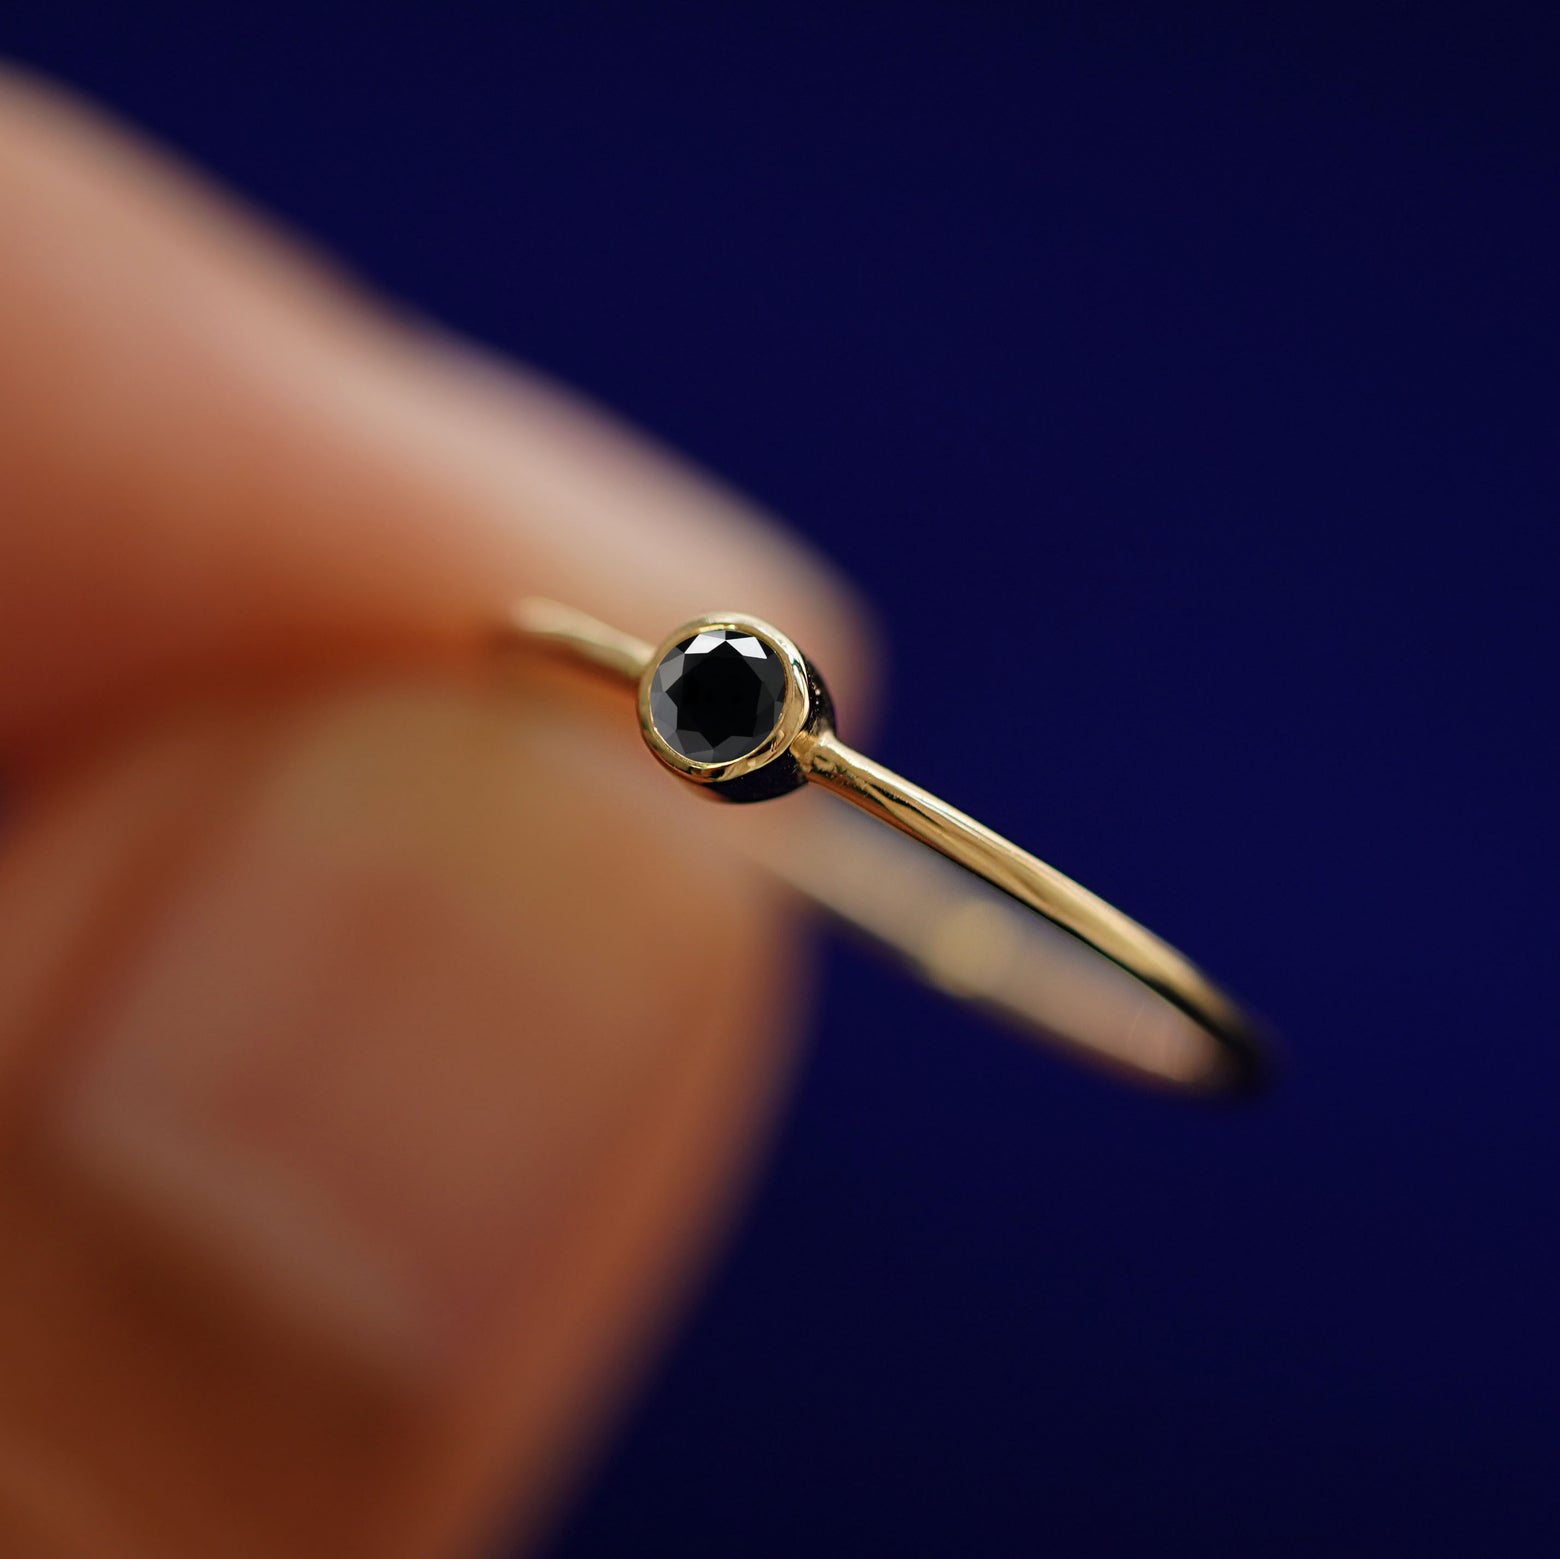 A model holding a Black Diamond Ring tilted to show the bezel setting